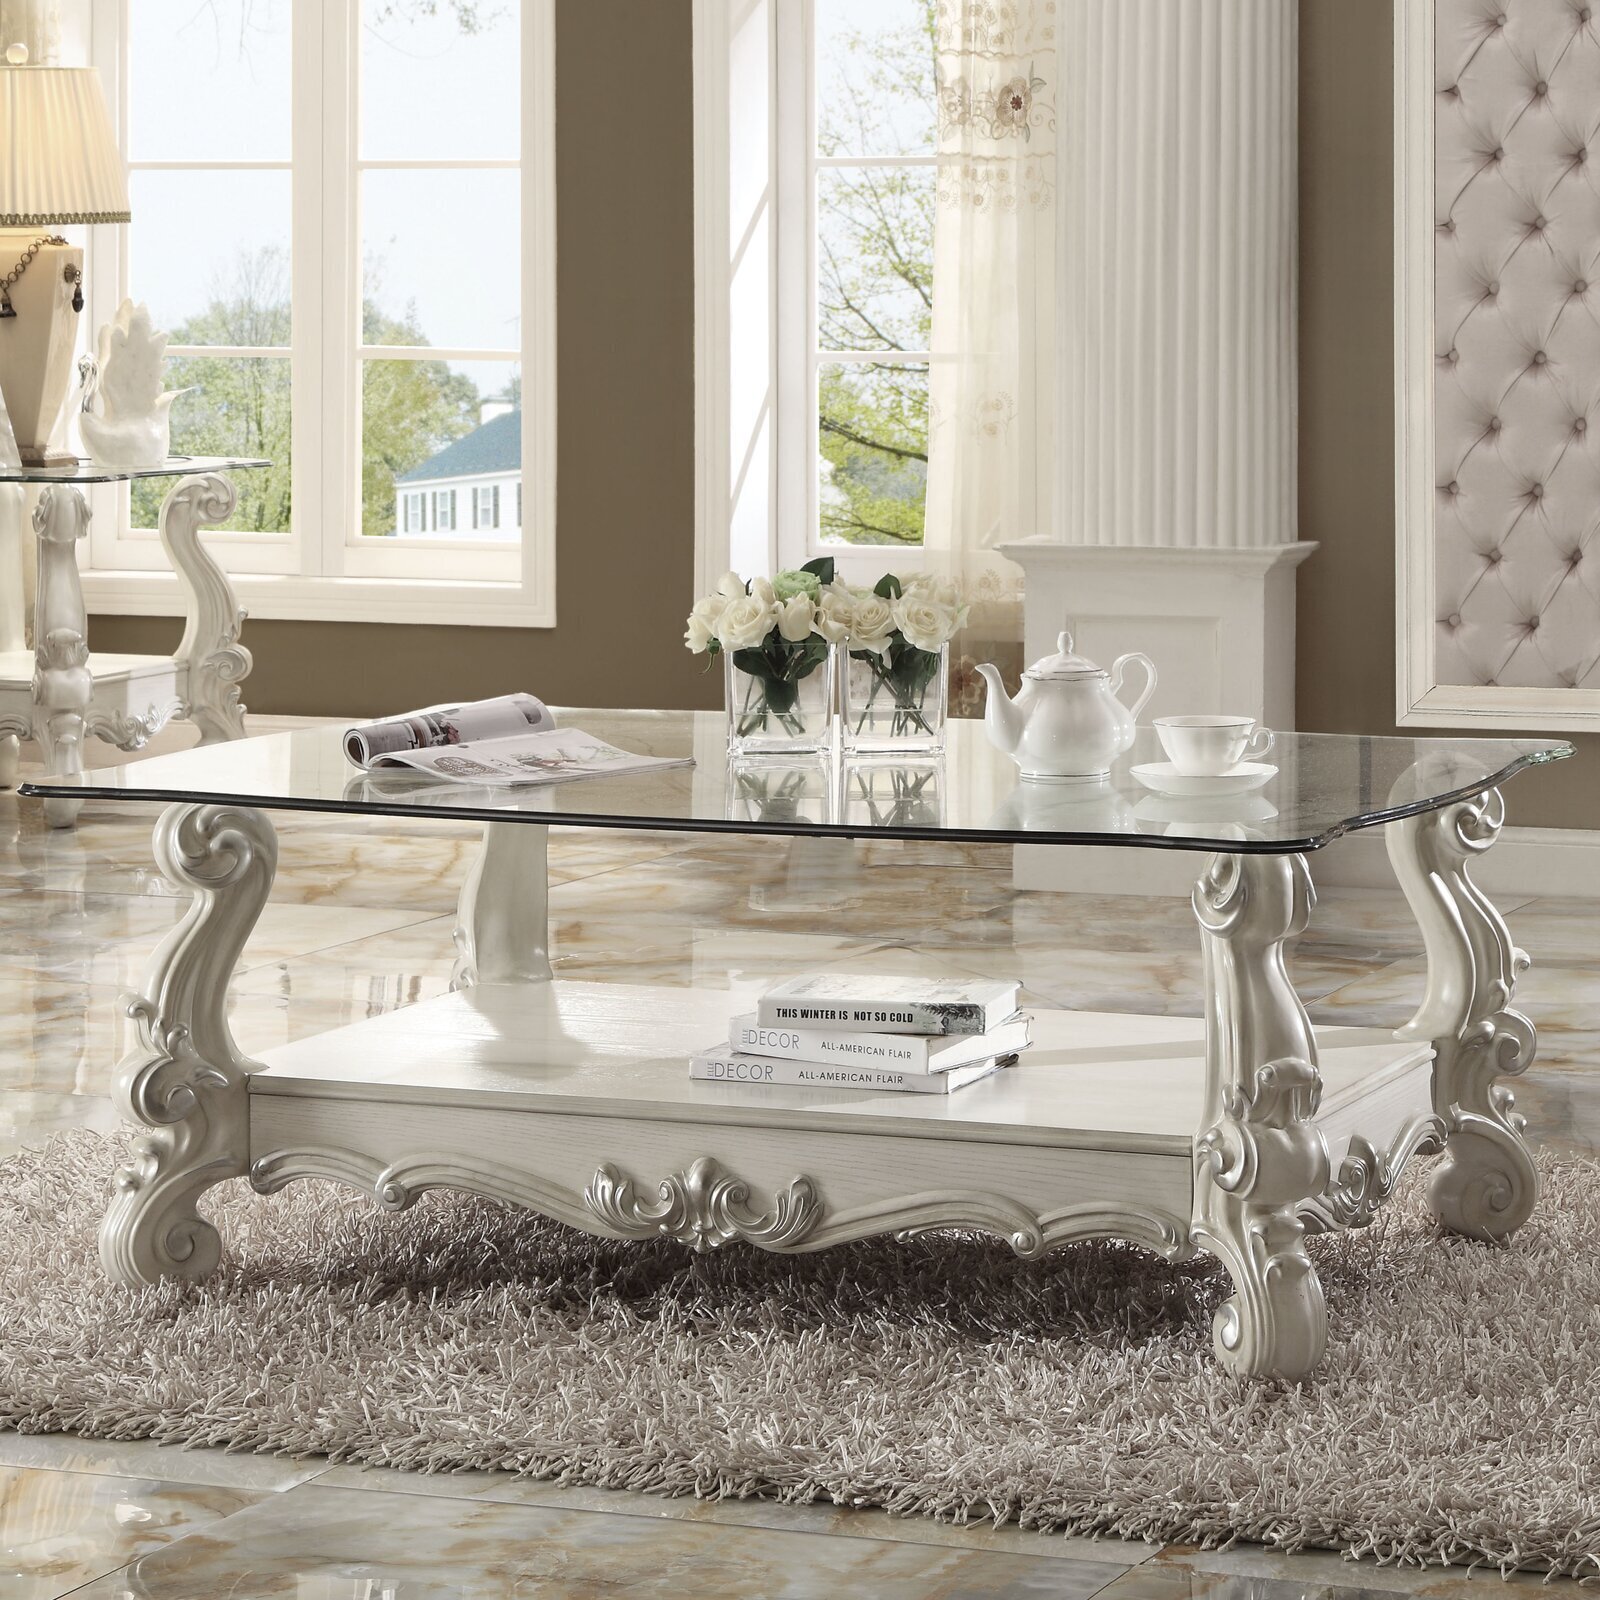 Extra Large Coffee Table With Ornate Legs